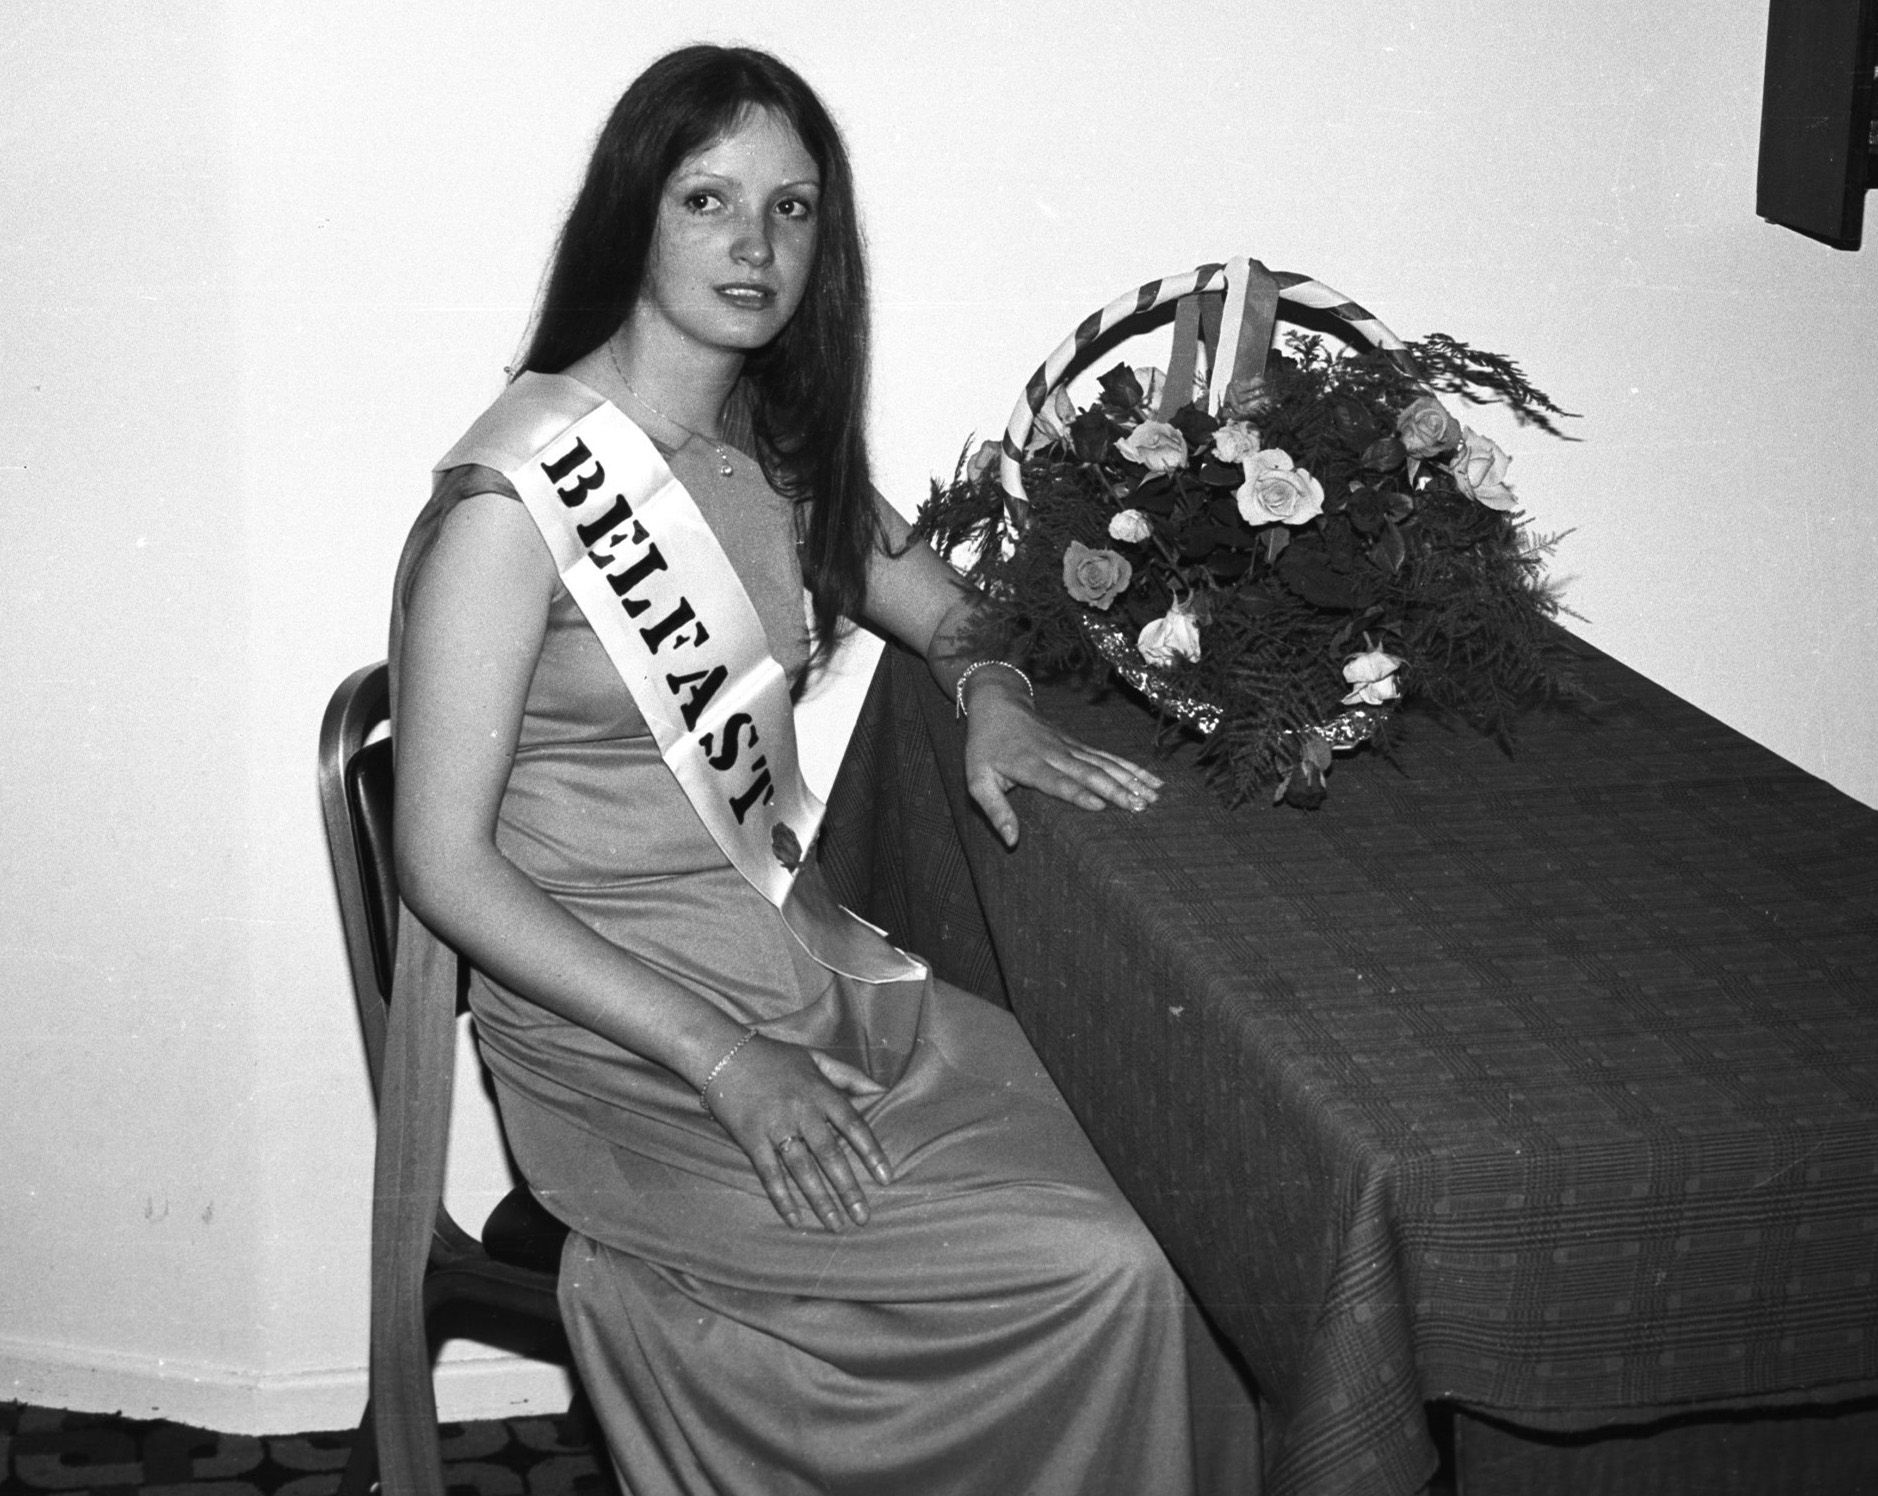 Marita Marron from Gransha was set to represent Belfast in the Rose of Tralee contest, this week back in June 1979